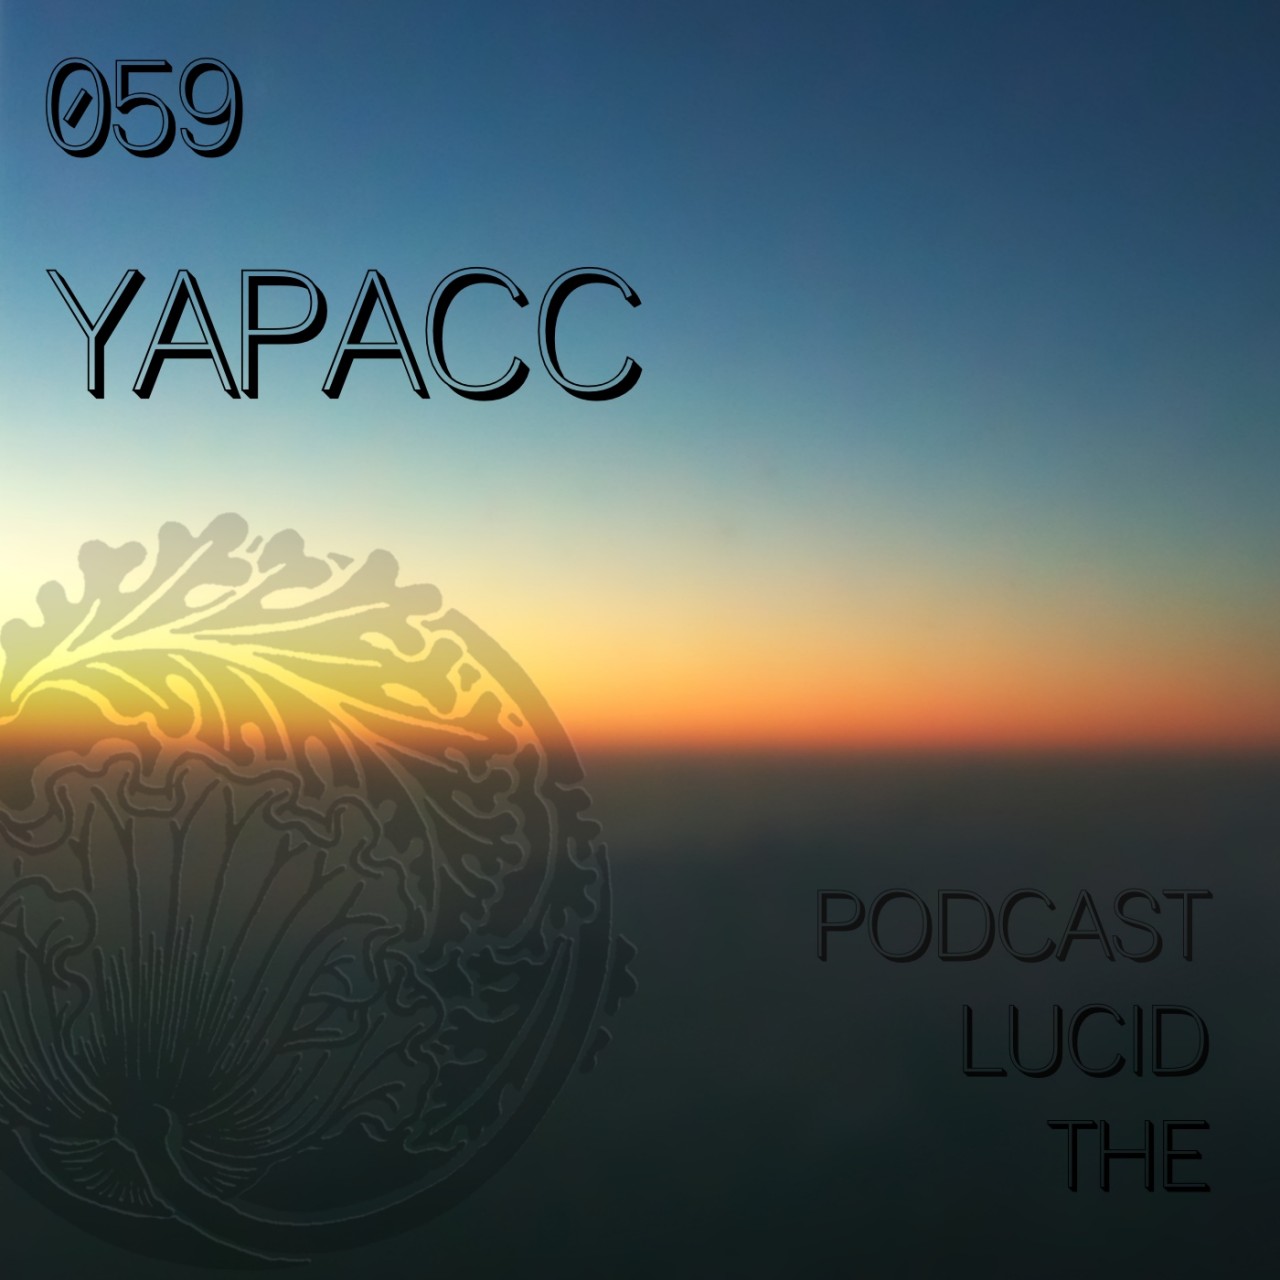 The Lucid Podcast 059 Yapacc Live